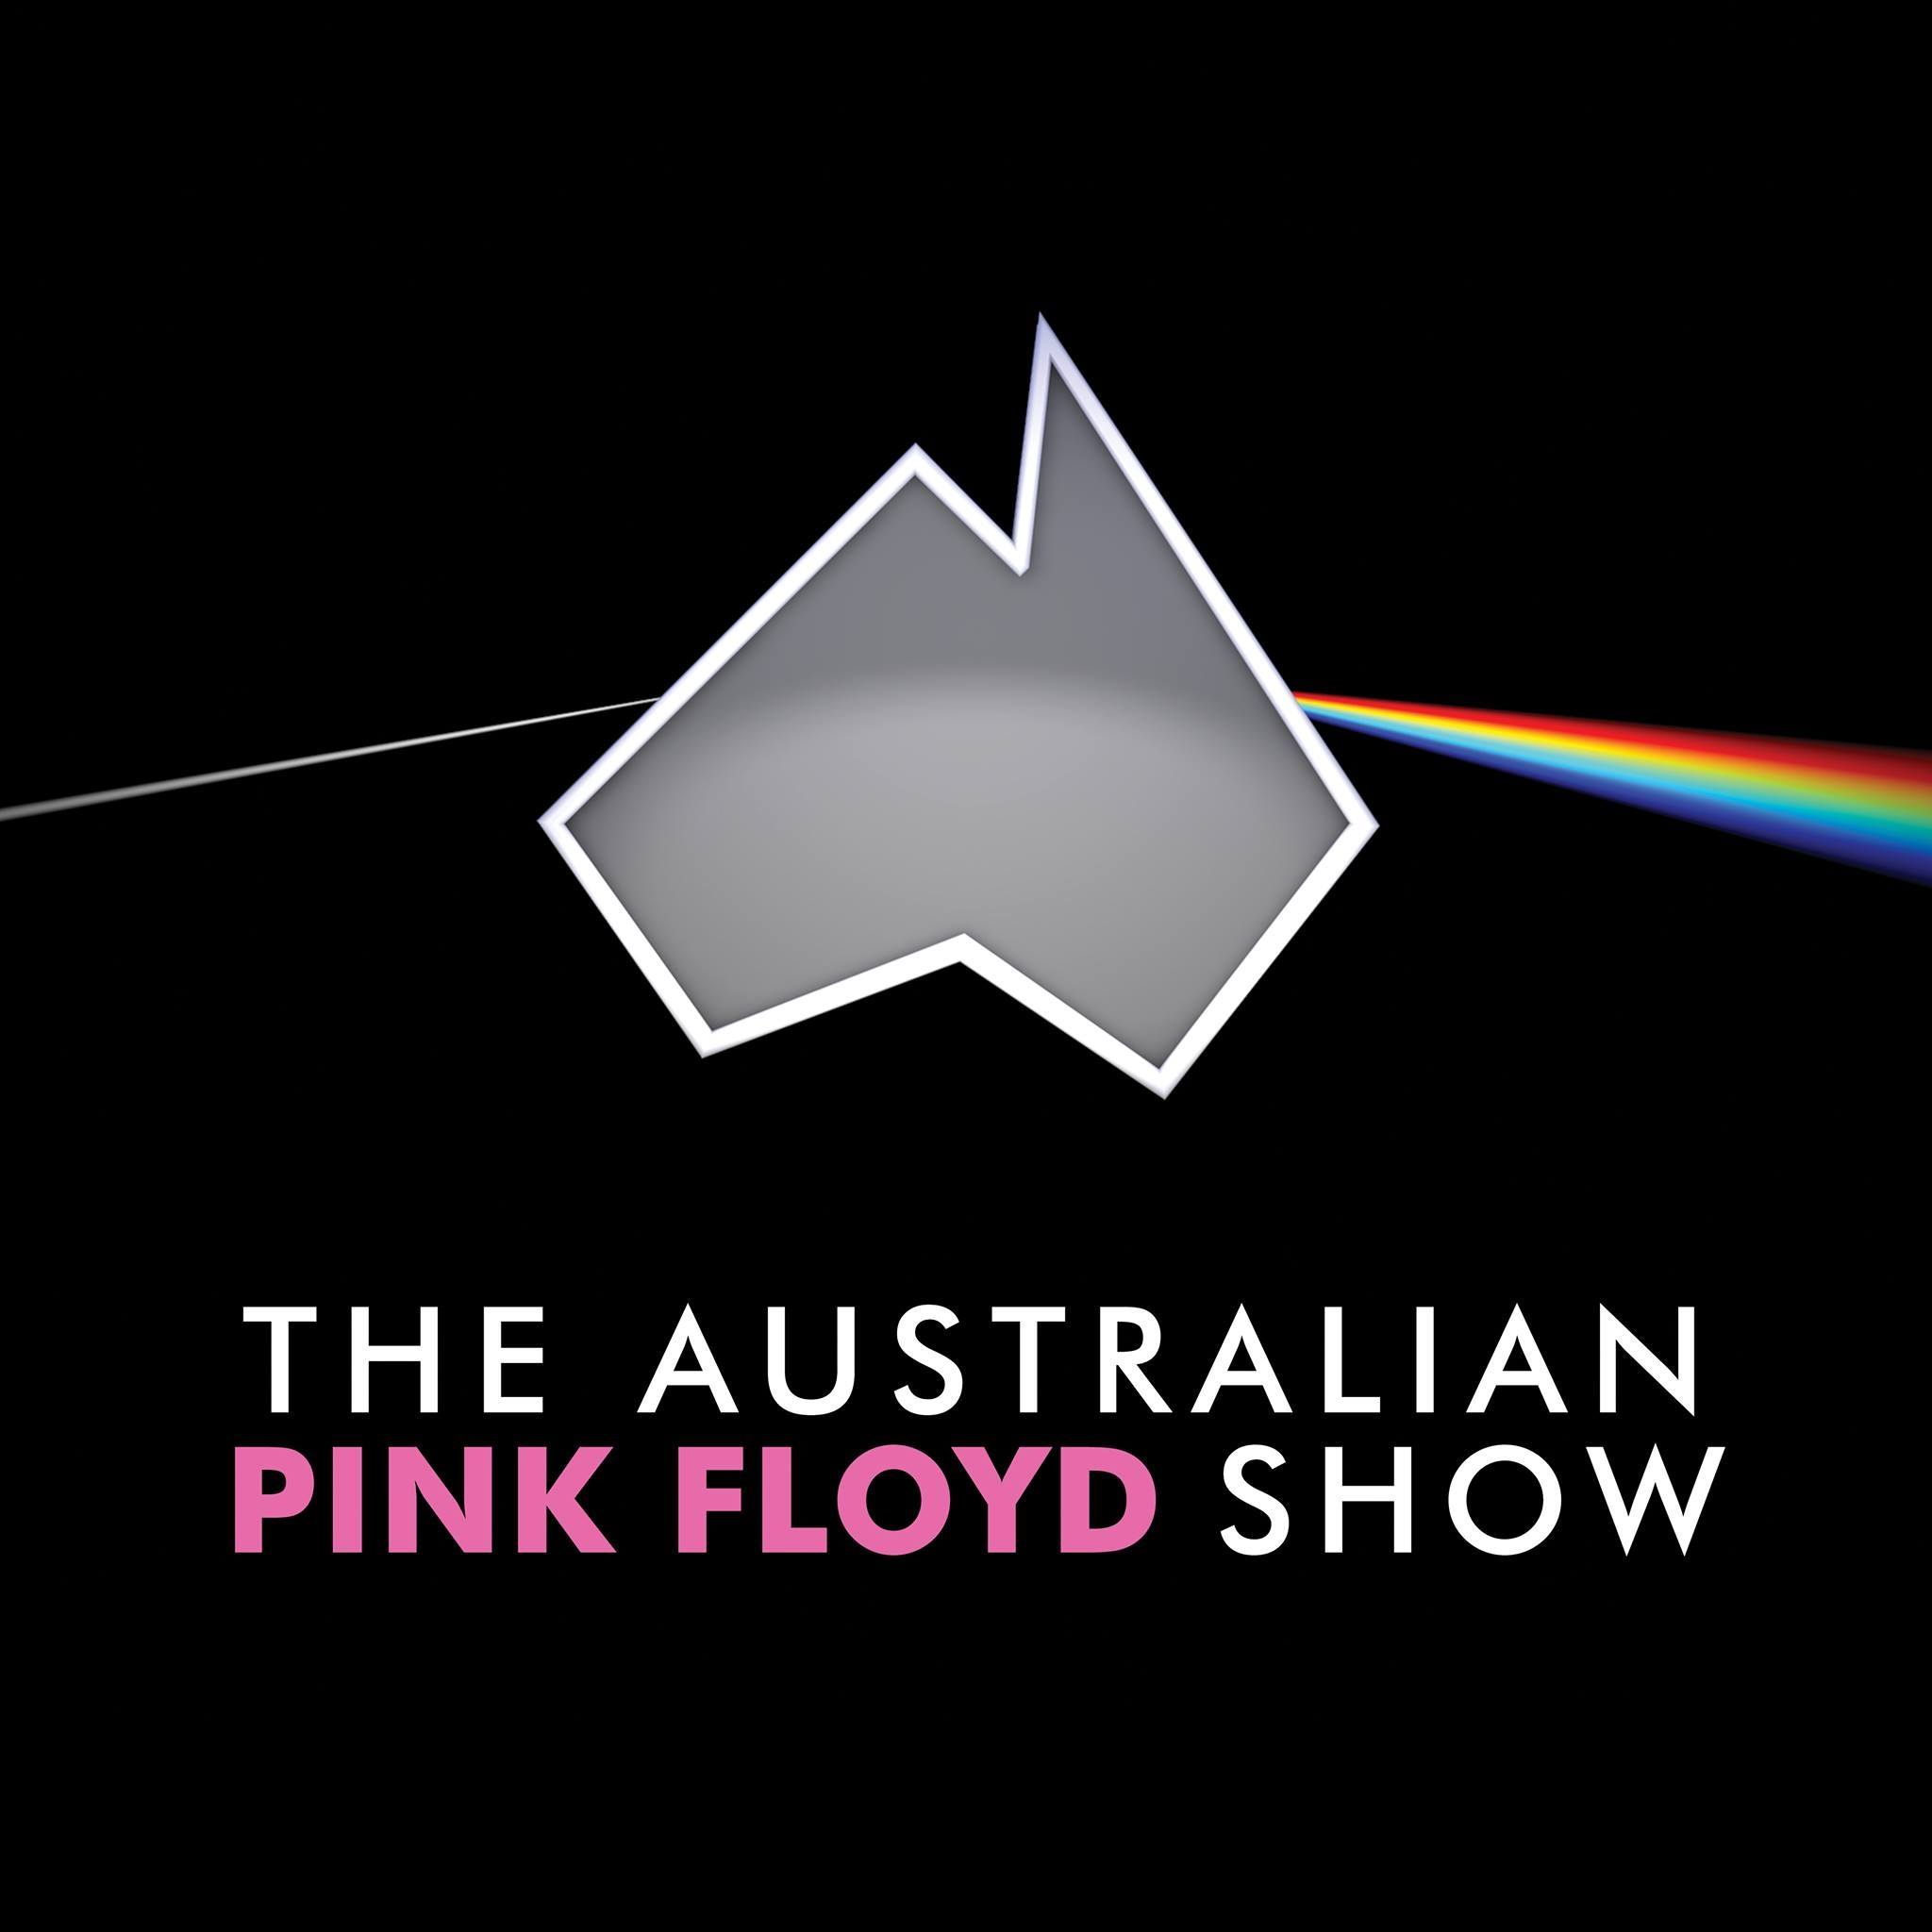 The Australian Pink Floyd Show at 3Olympia Theatre Tickets